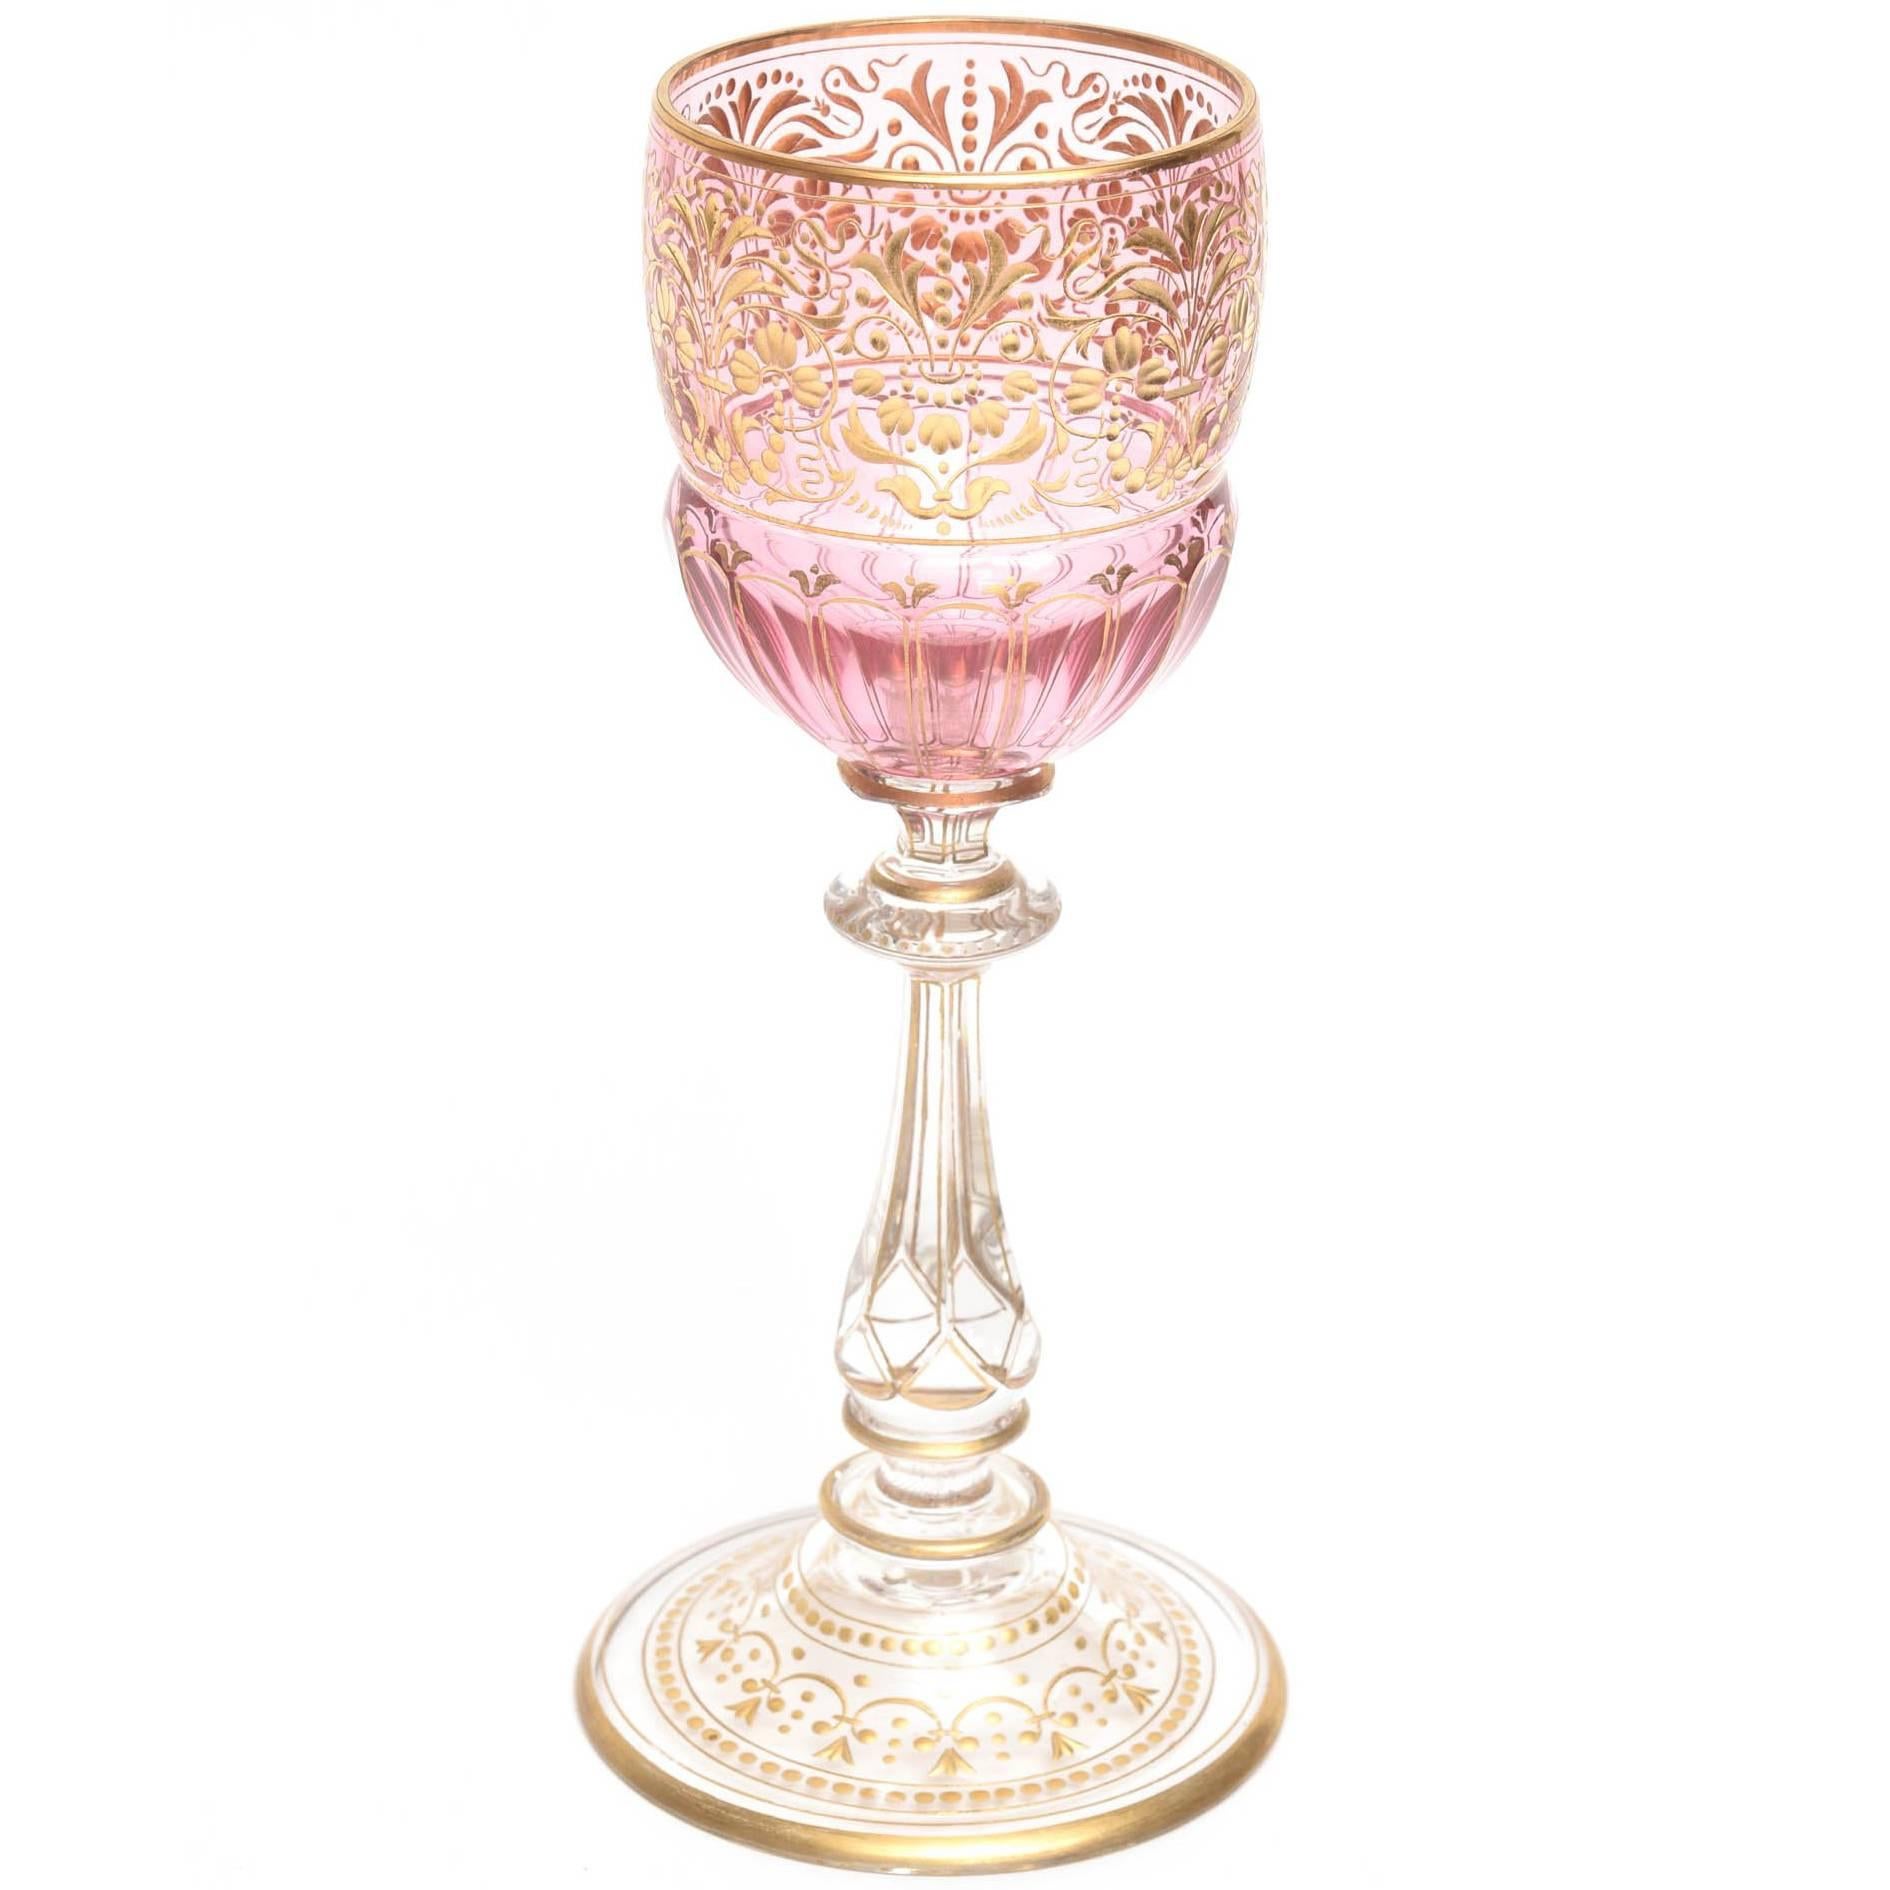 8 Elaborate Gilt and Ruby Pink Wine Goblets with Beautiful Stem